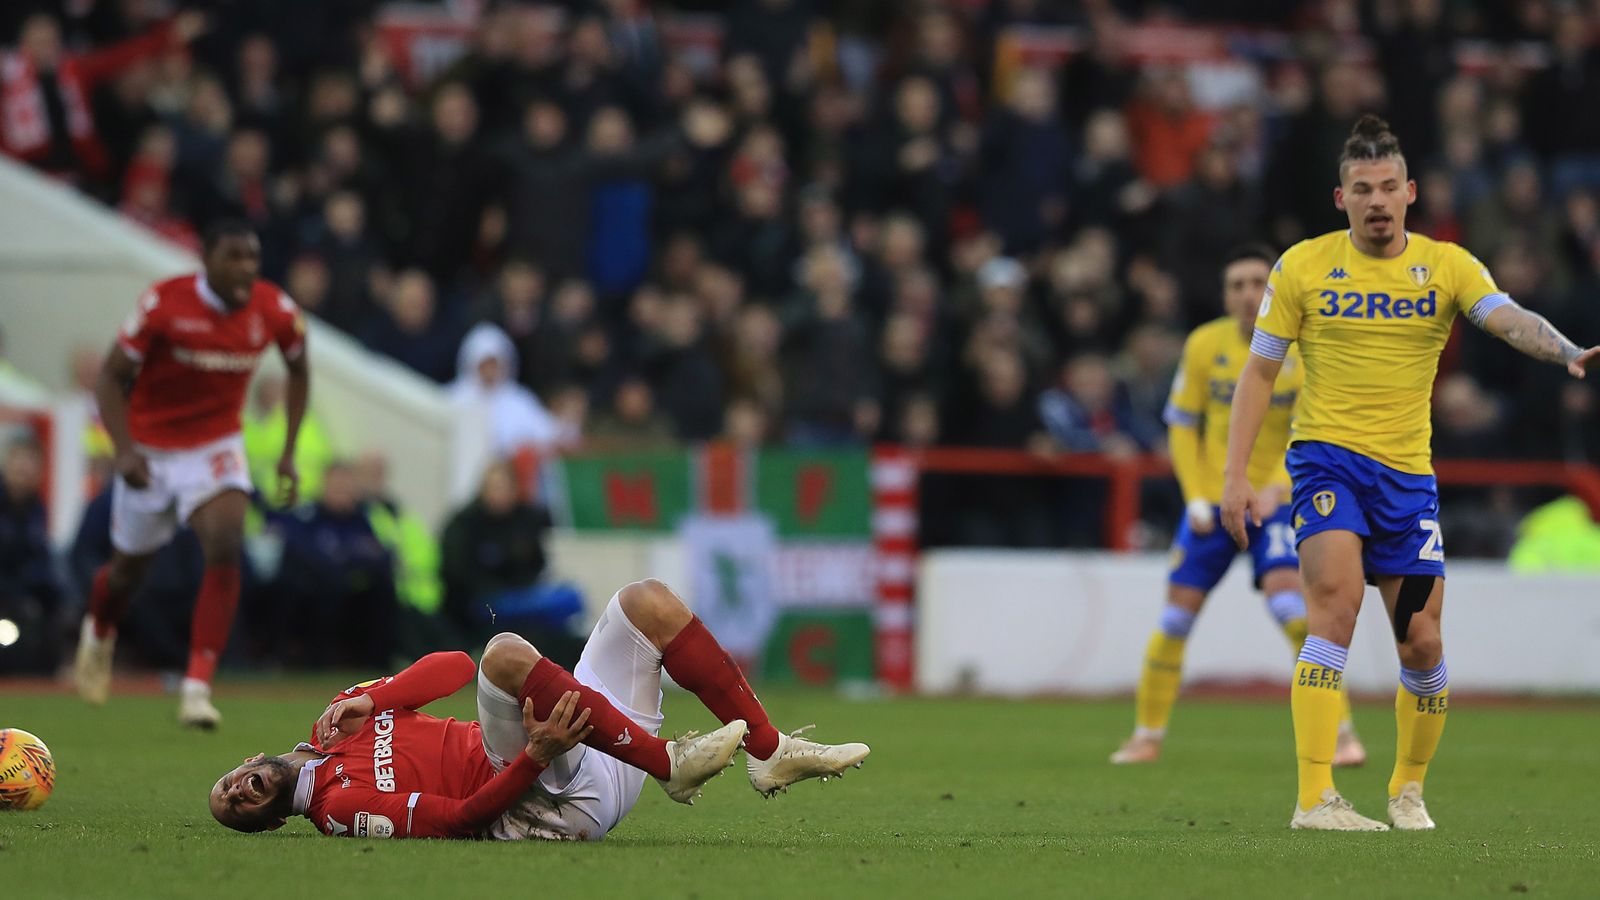 WATCH: Did Leeds' deserve a red card against Nottingham Forest? | Football News | Sky Sports